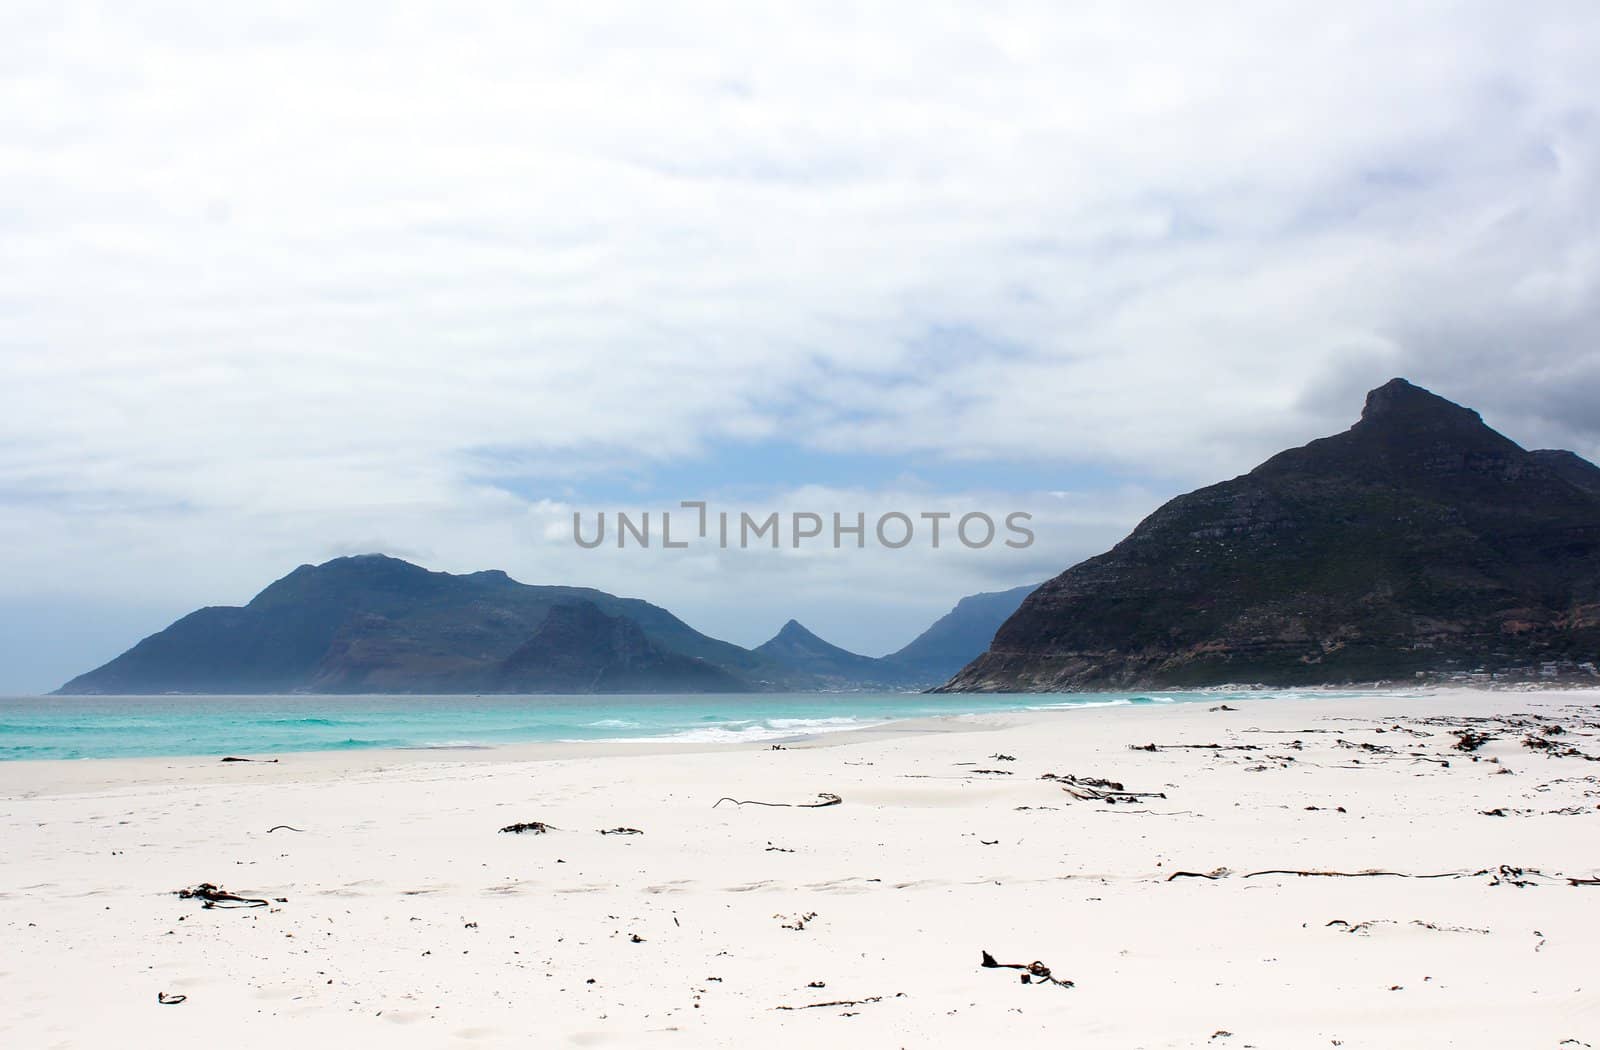 Beach of Kommetjie with an upcoming storm in the background and blue water